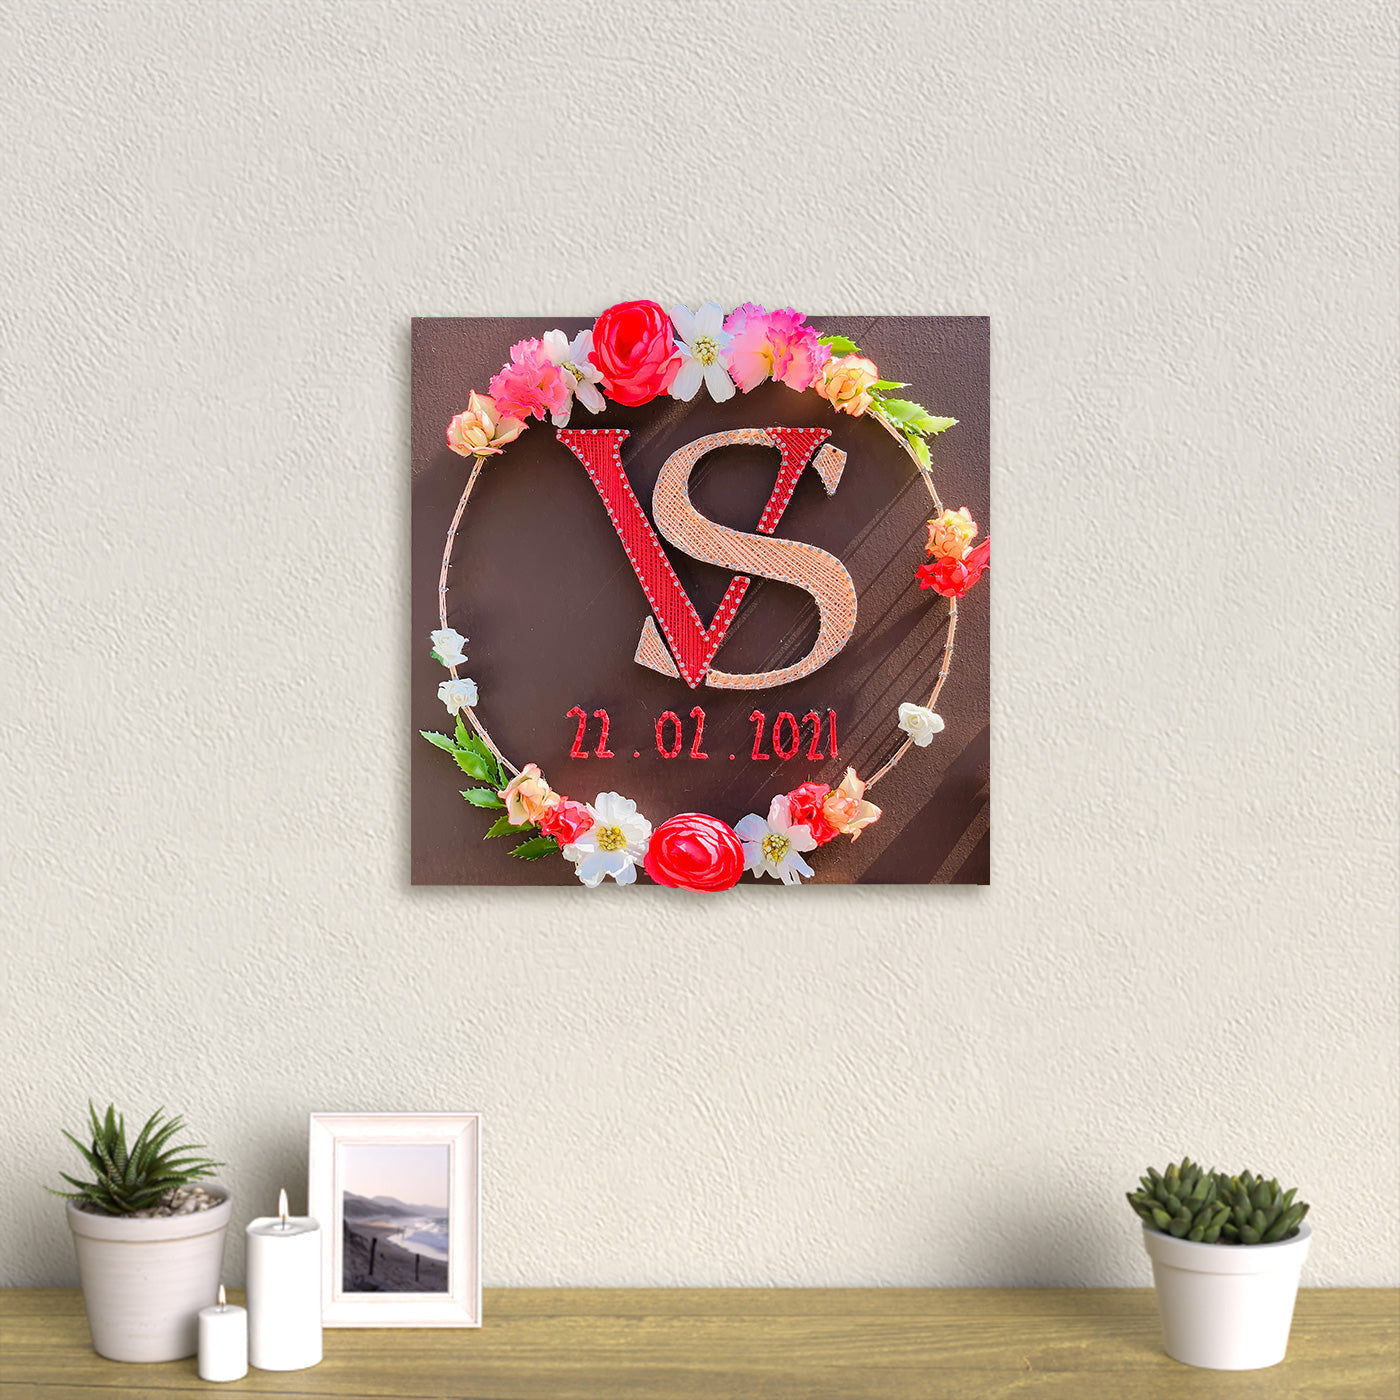 String Art Floral Wreath Personalized Wedding Couple Initials Nameplate